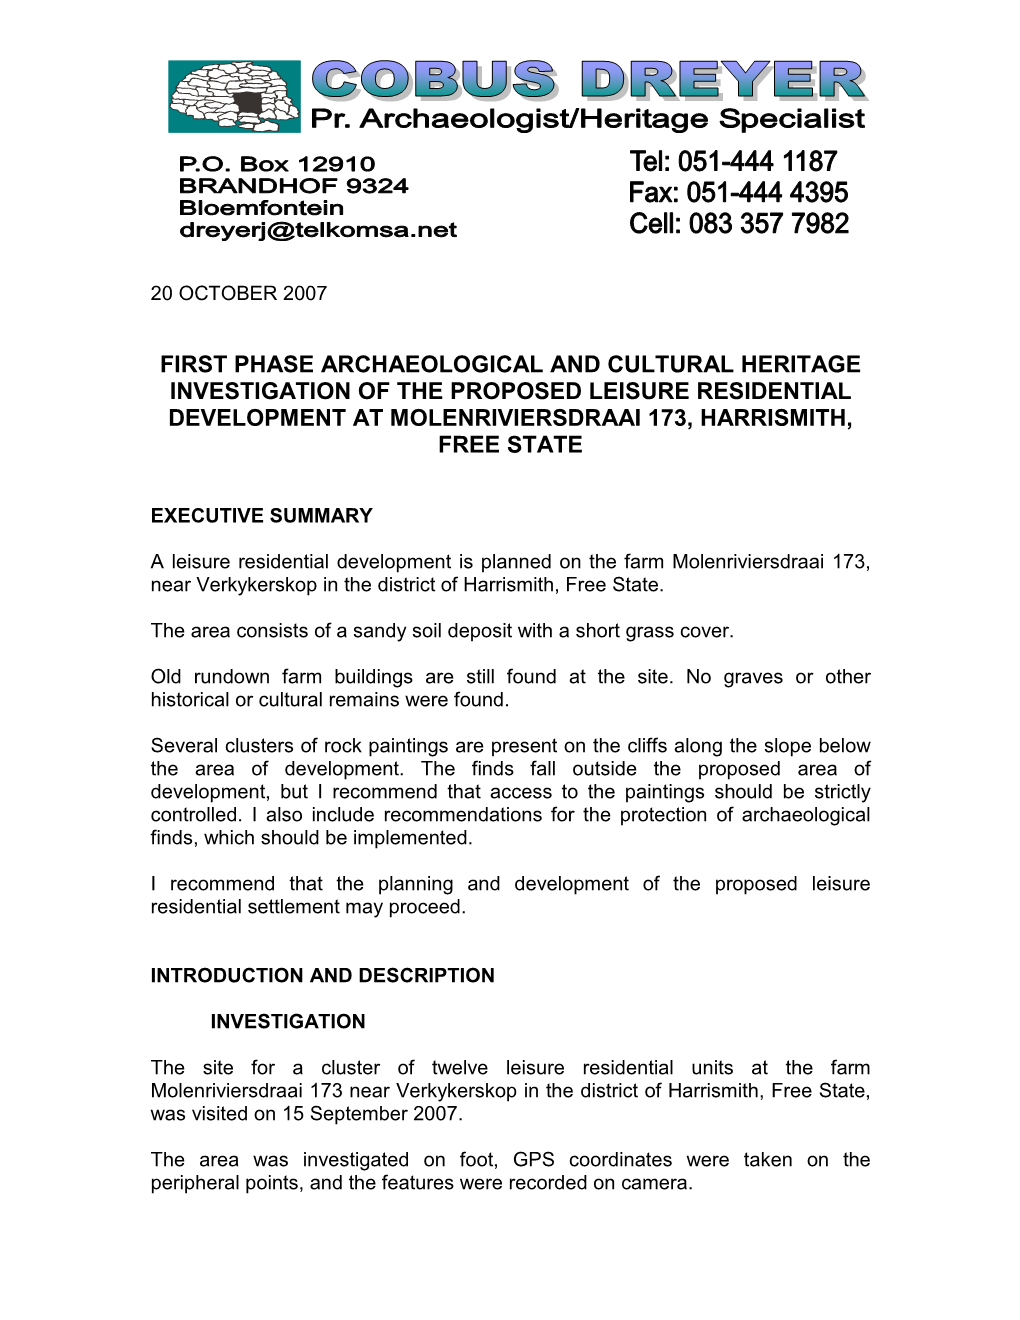 First Phase Archaeological and Cultural Heritage Investigation of the Proposed Leisure Residential Development at Molenriviersdraai 173, Harrismith, Free State